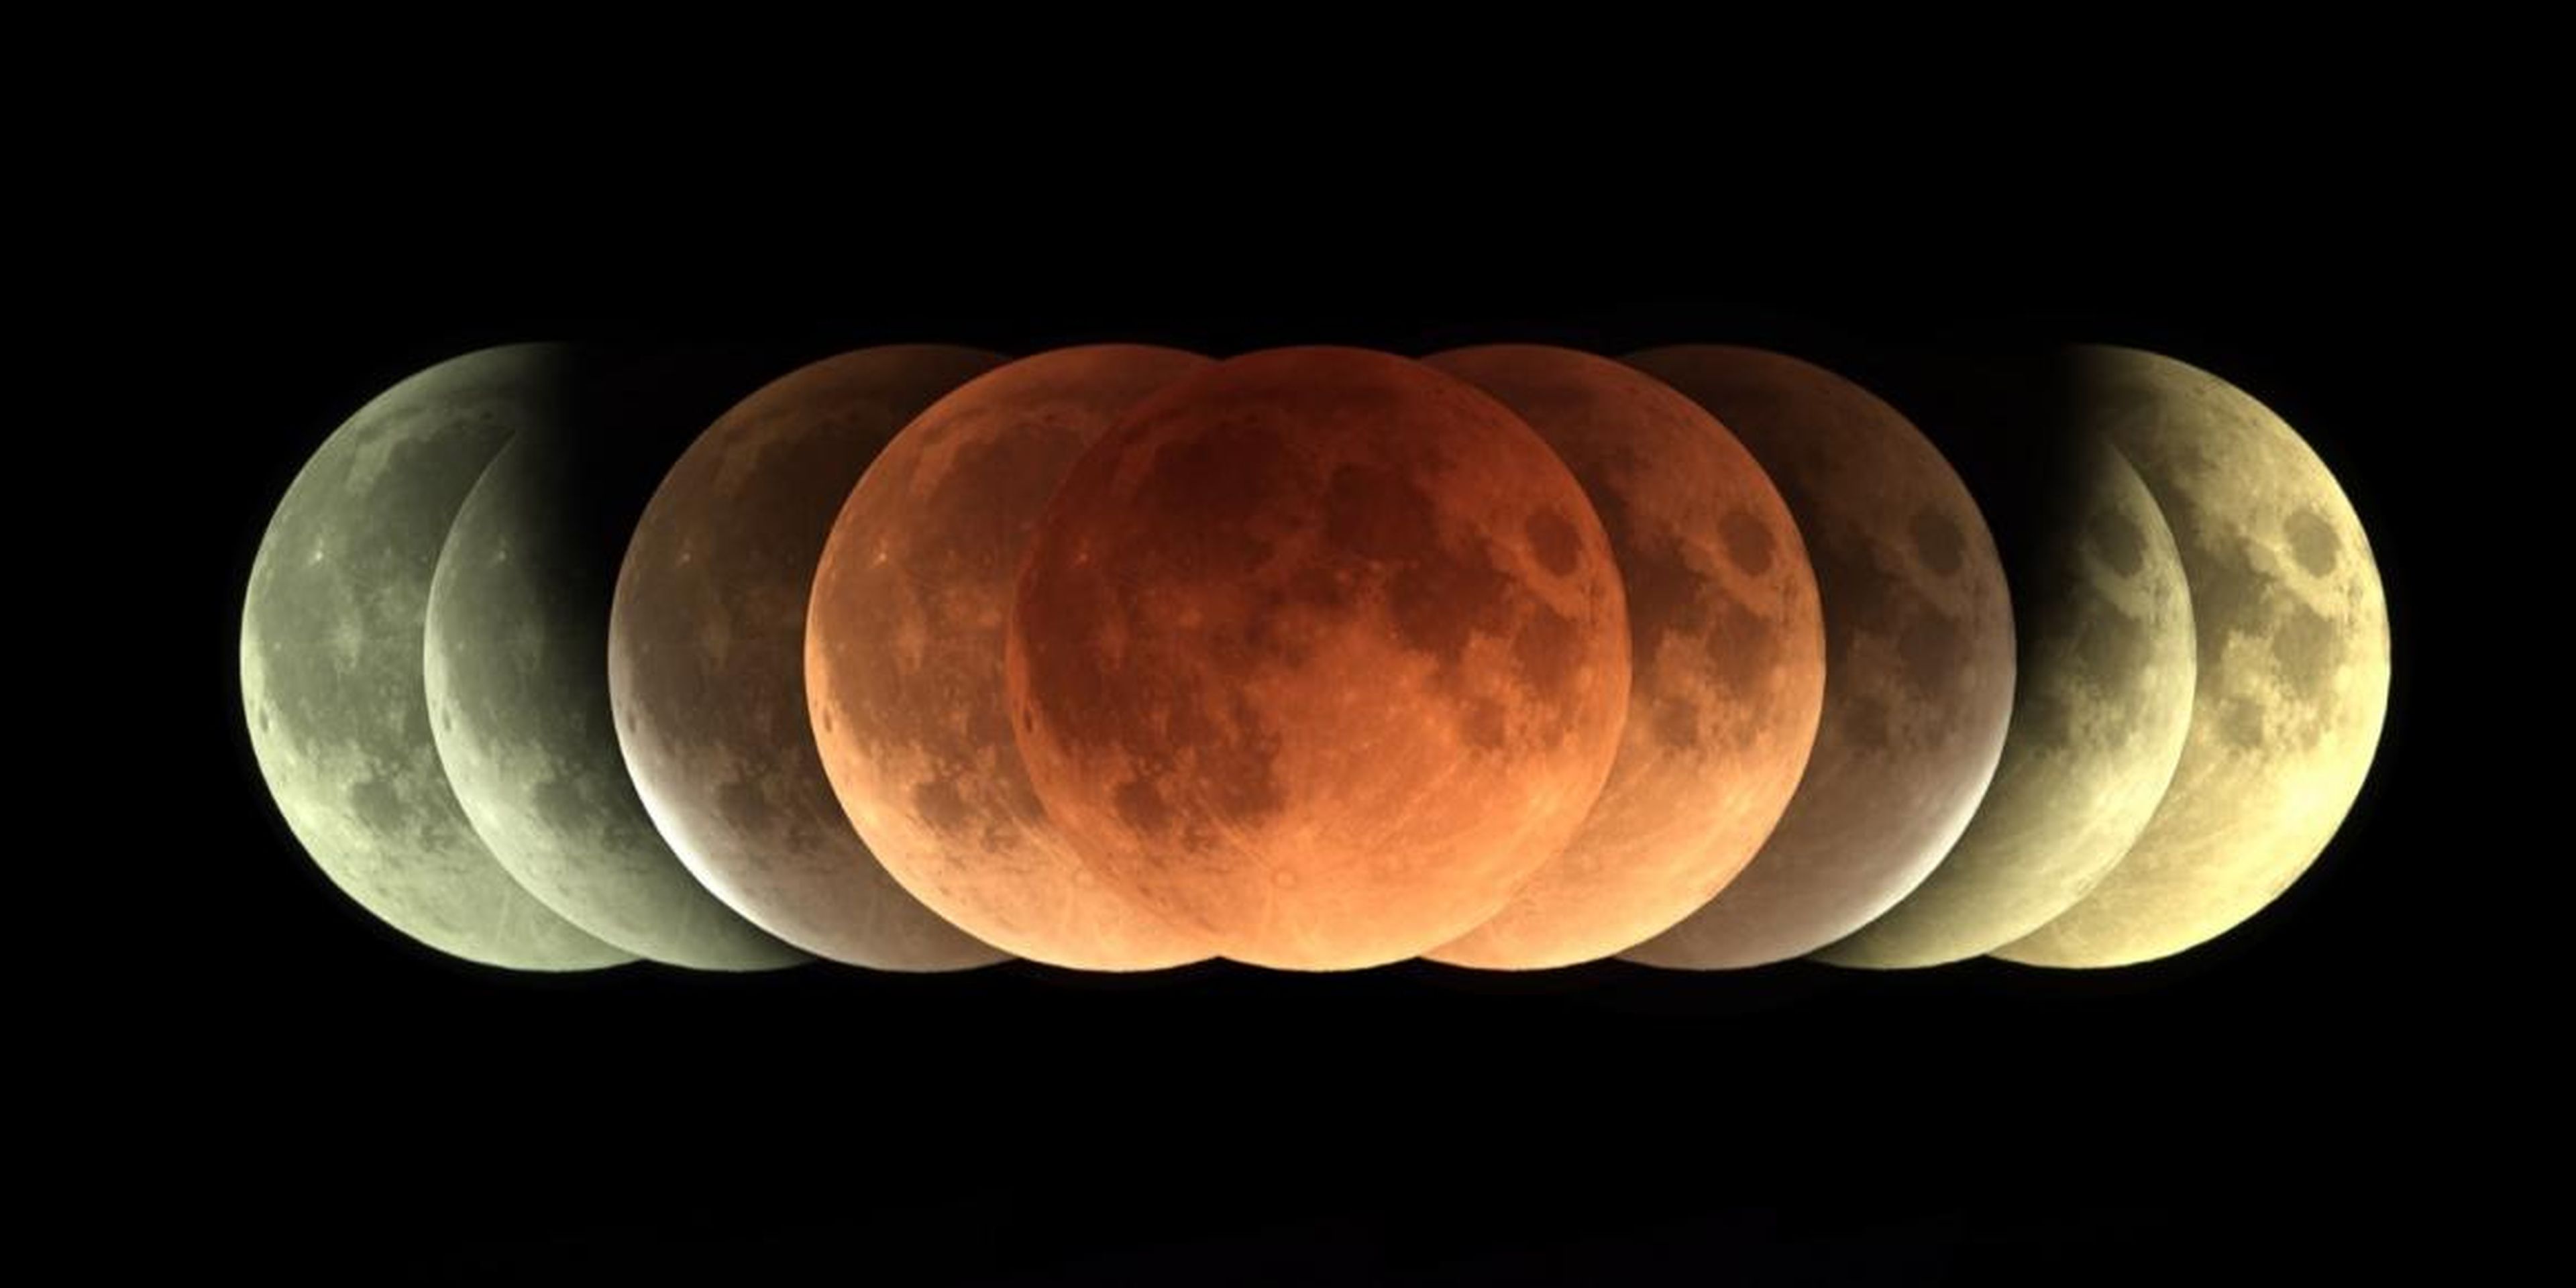 A total lunar eclipse or blood moon as seen in a time-lapse series of images.